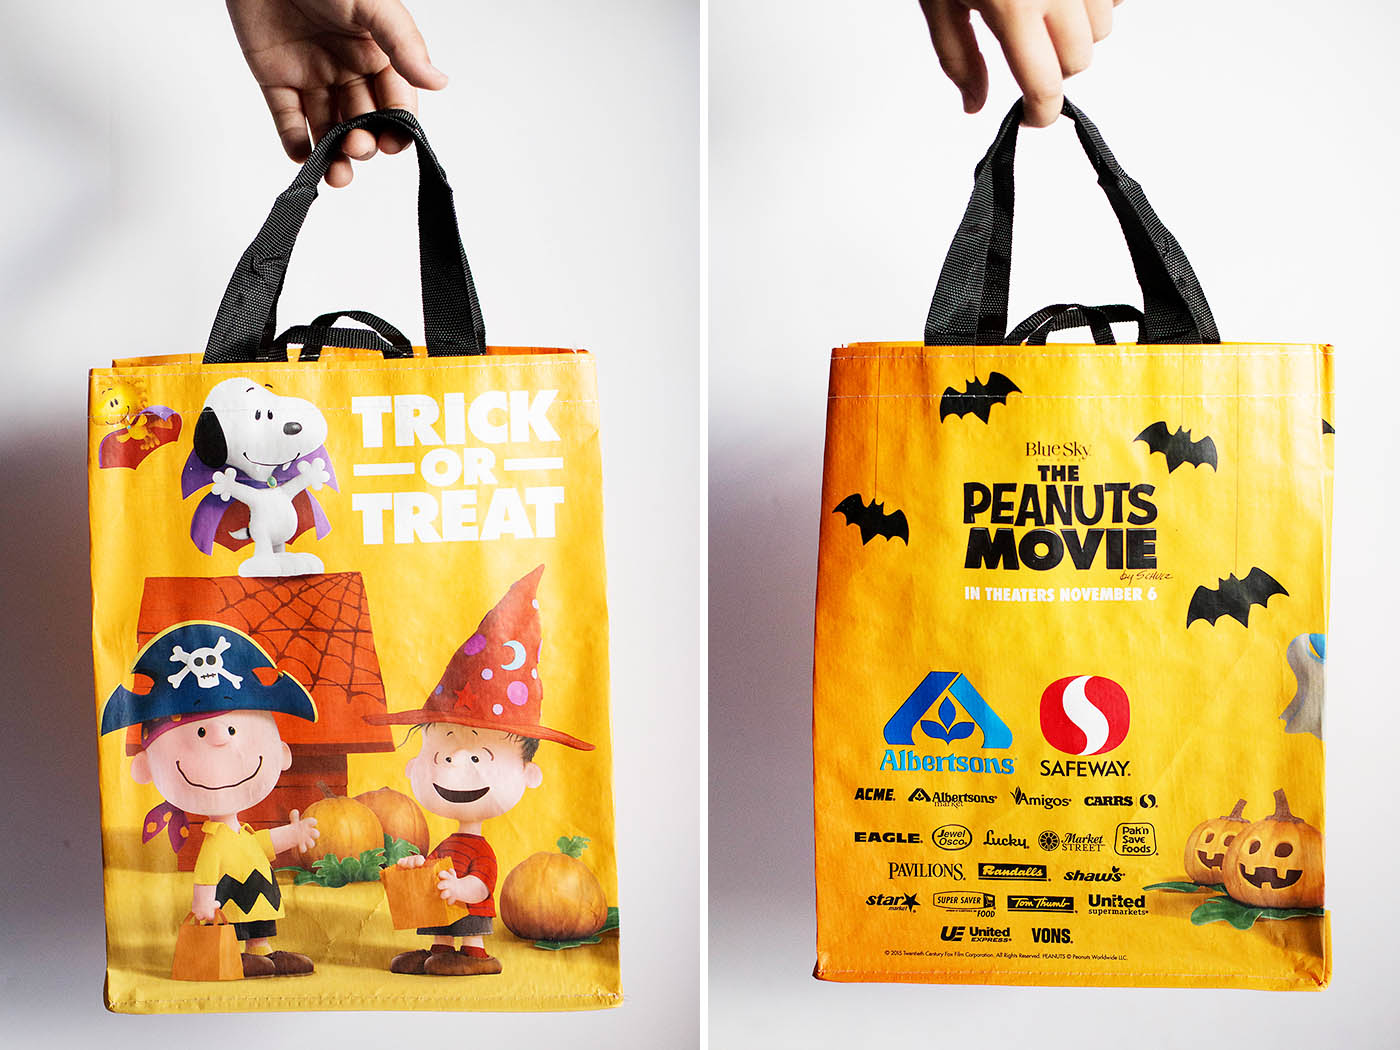 Free Peanuts movie trick or treat bag  with purchase from Albertsons or Safeway!